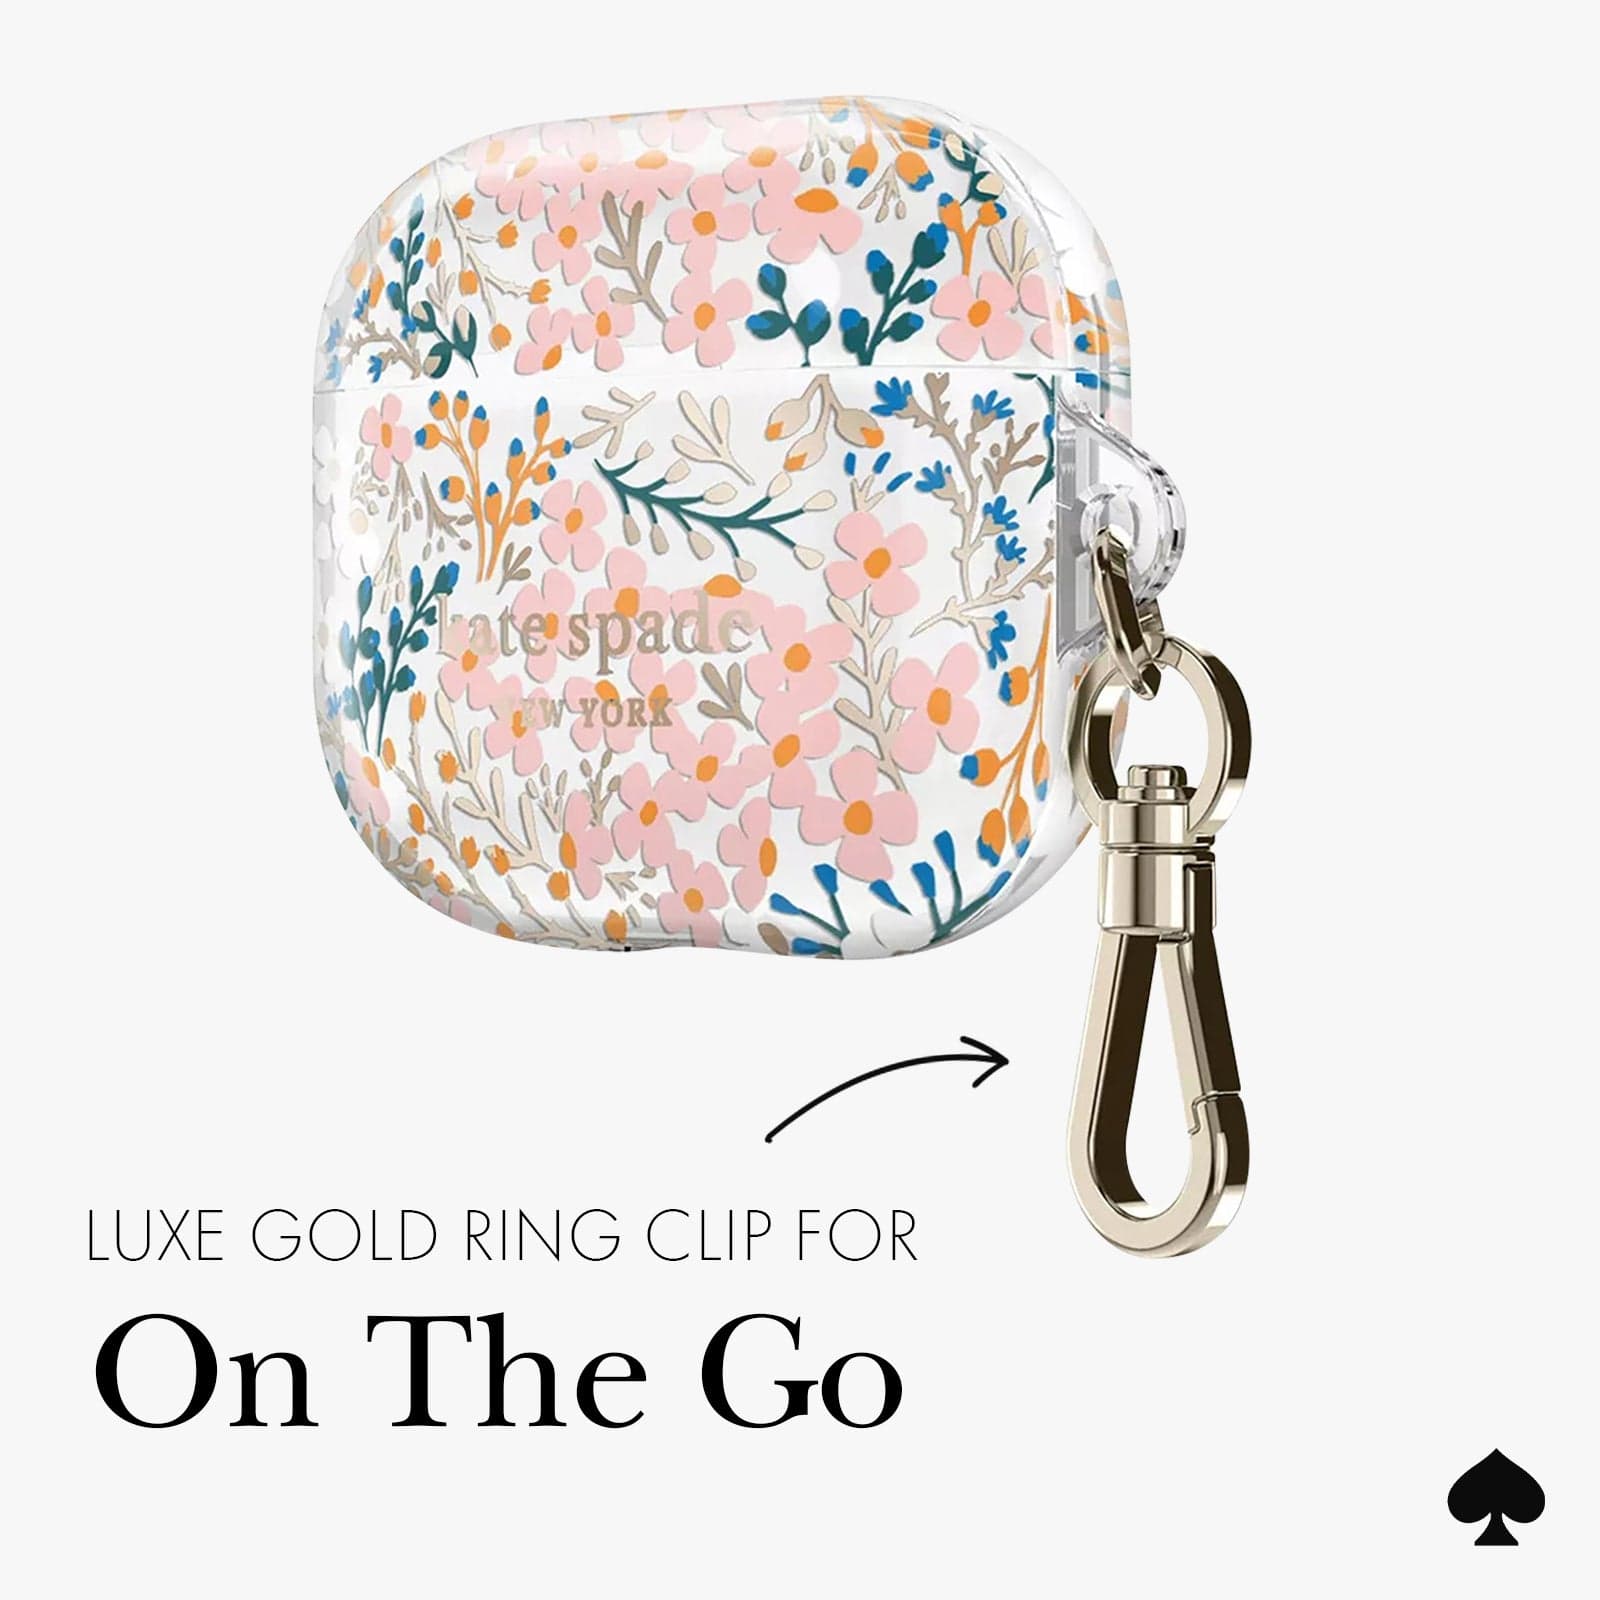 LUXE GOLD RING CLIP FOR ON THE GO